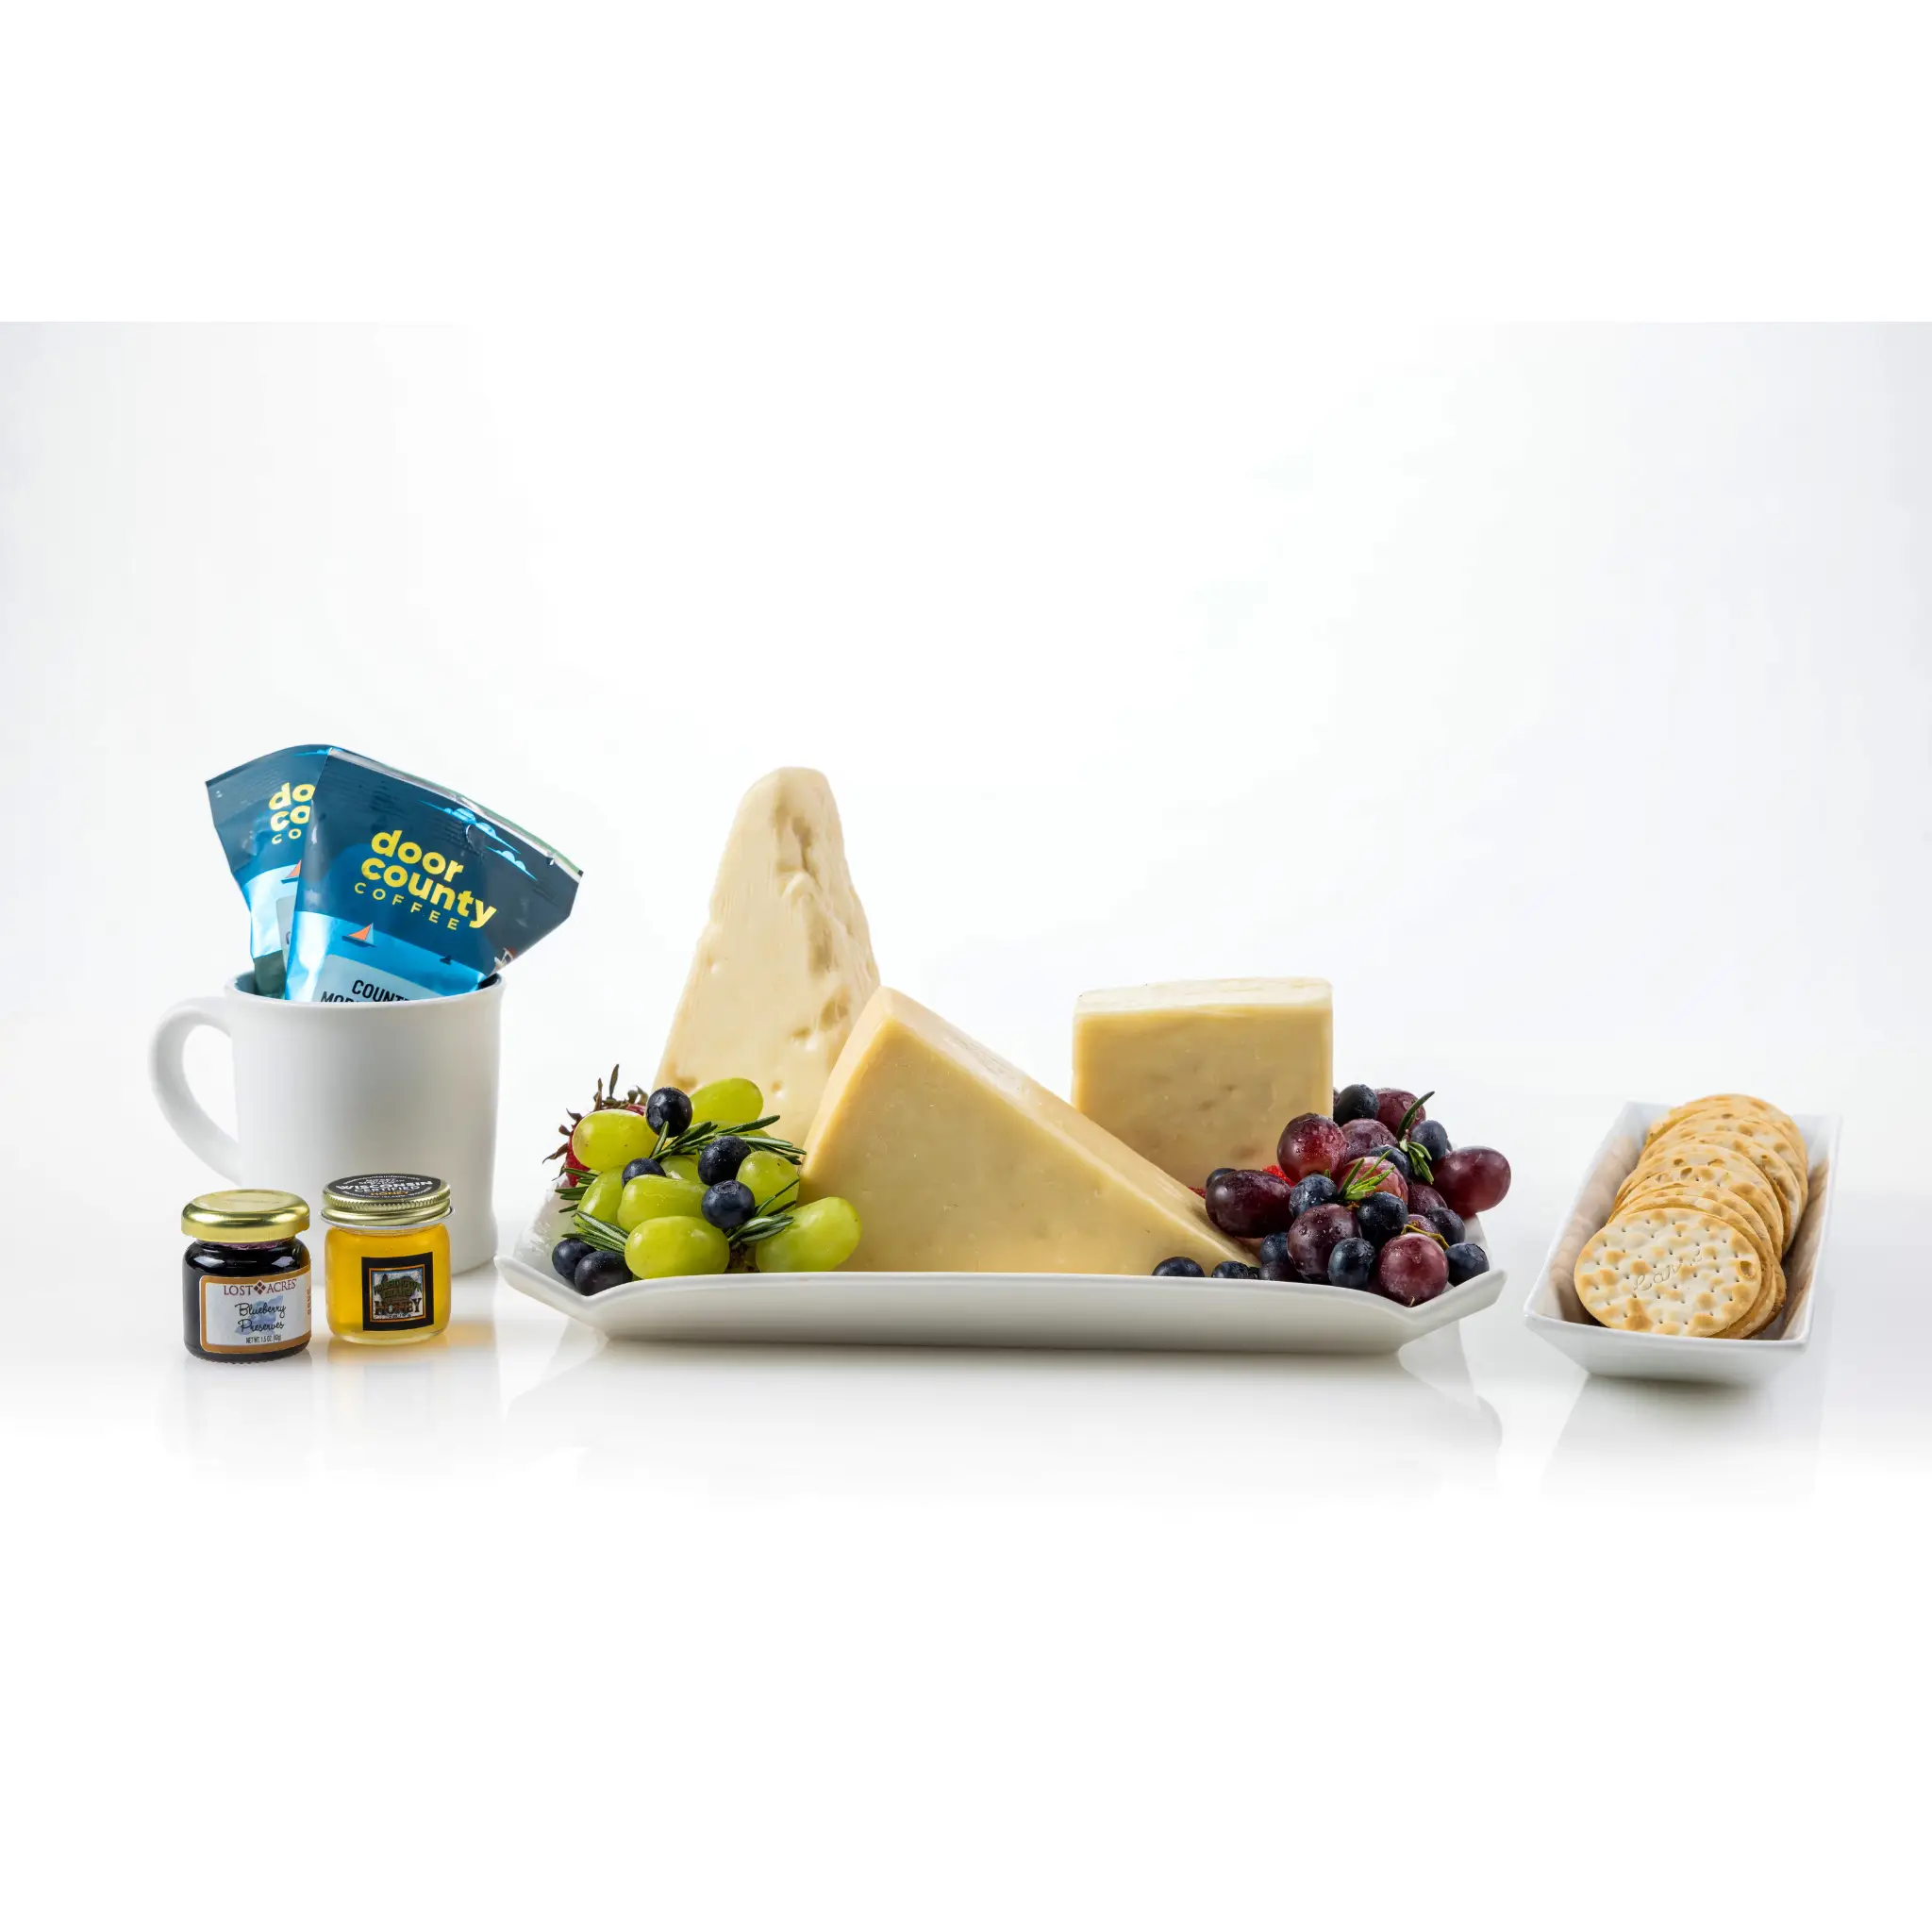 All of these items come beautifully arranged in a Renard's Artisan Cheese gift box. One gift box per shipment. Multiple gift boxes will need to be placed as multiple orders. In-store pickups may select an unlimited number of gift boxes. No modifications or additions may be made to this gift box.